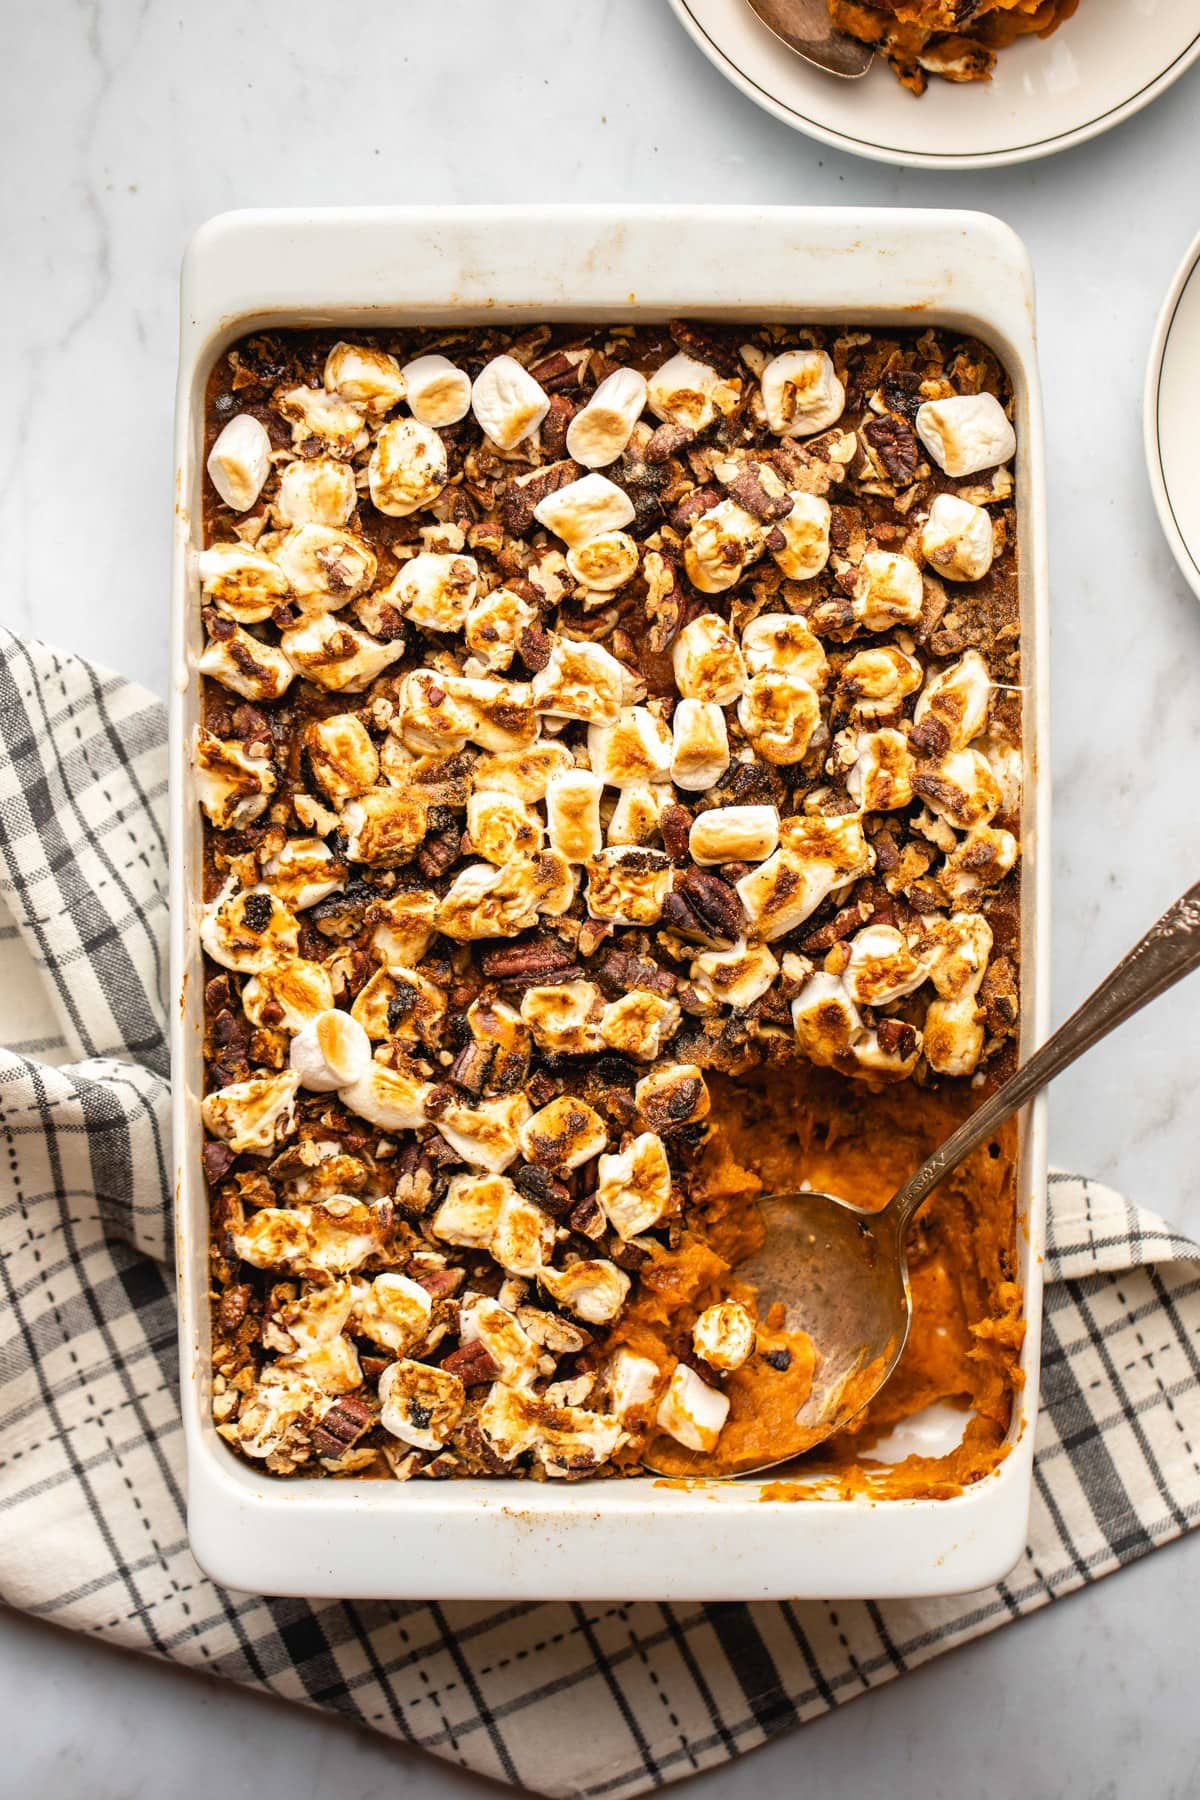 Healthy_Sweet_Potato_Casserole_Vegan_FromMyBowl-10 - From My Bowl